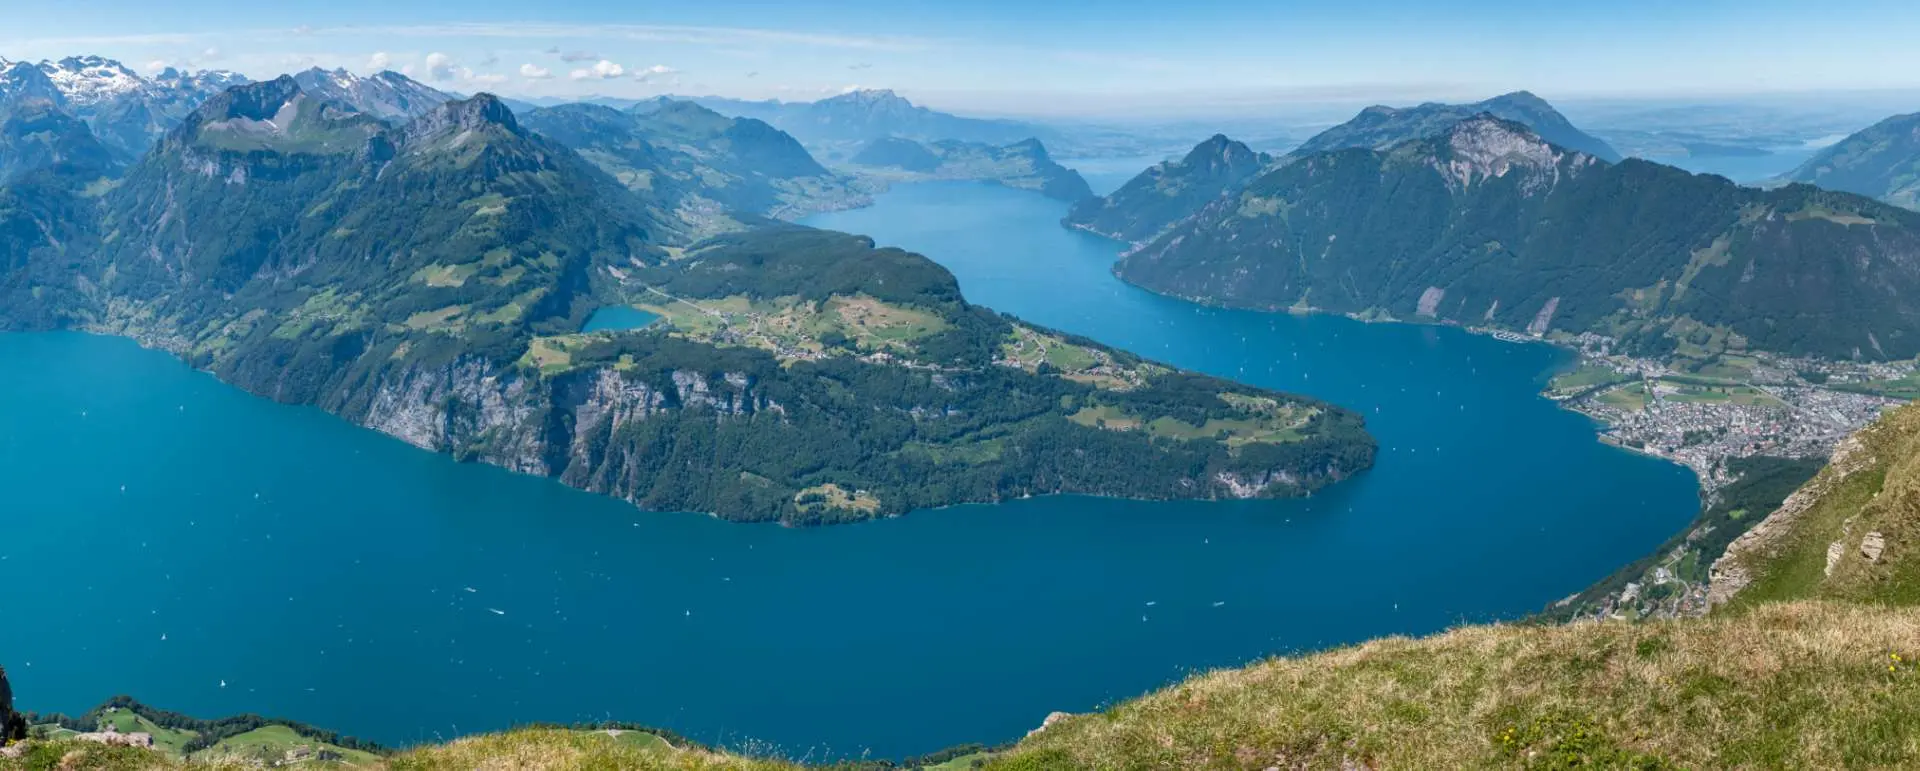 Lake Lucerne - the destination with large hotels